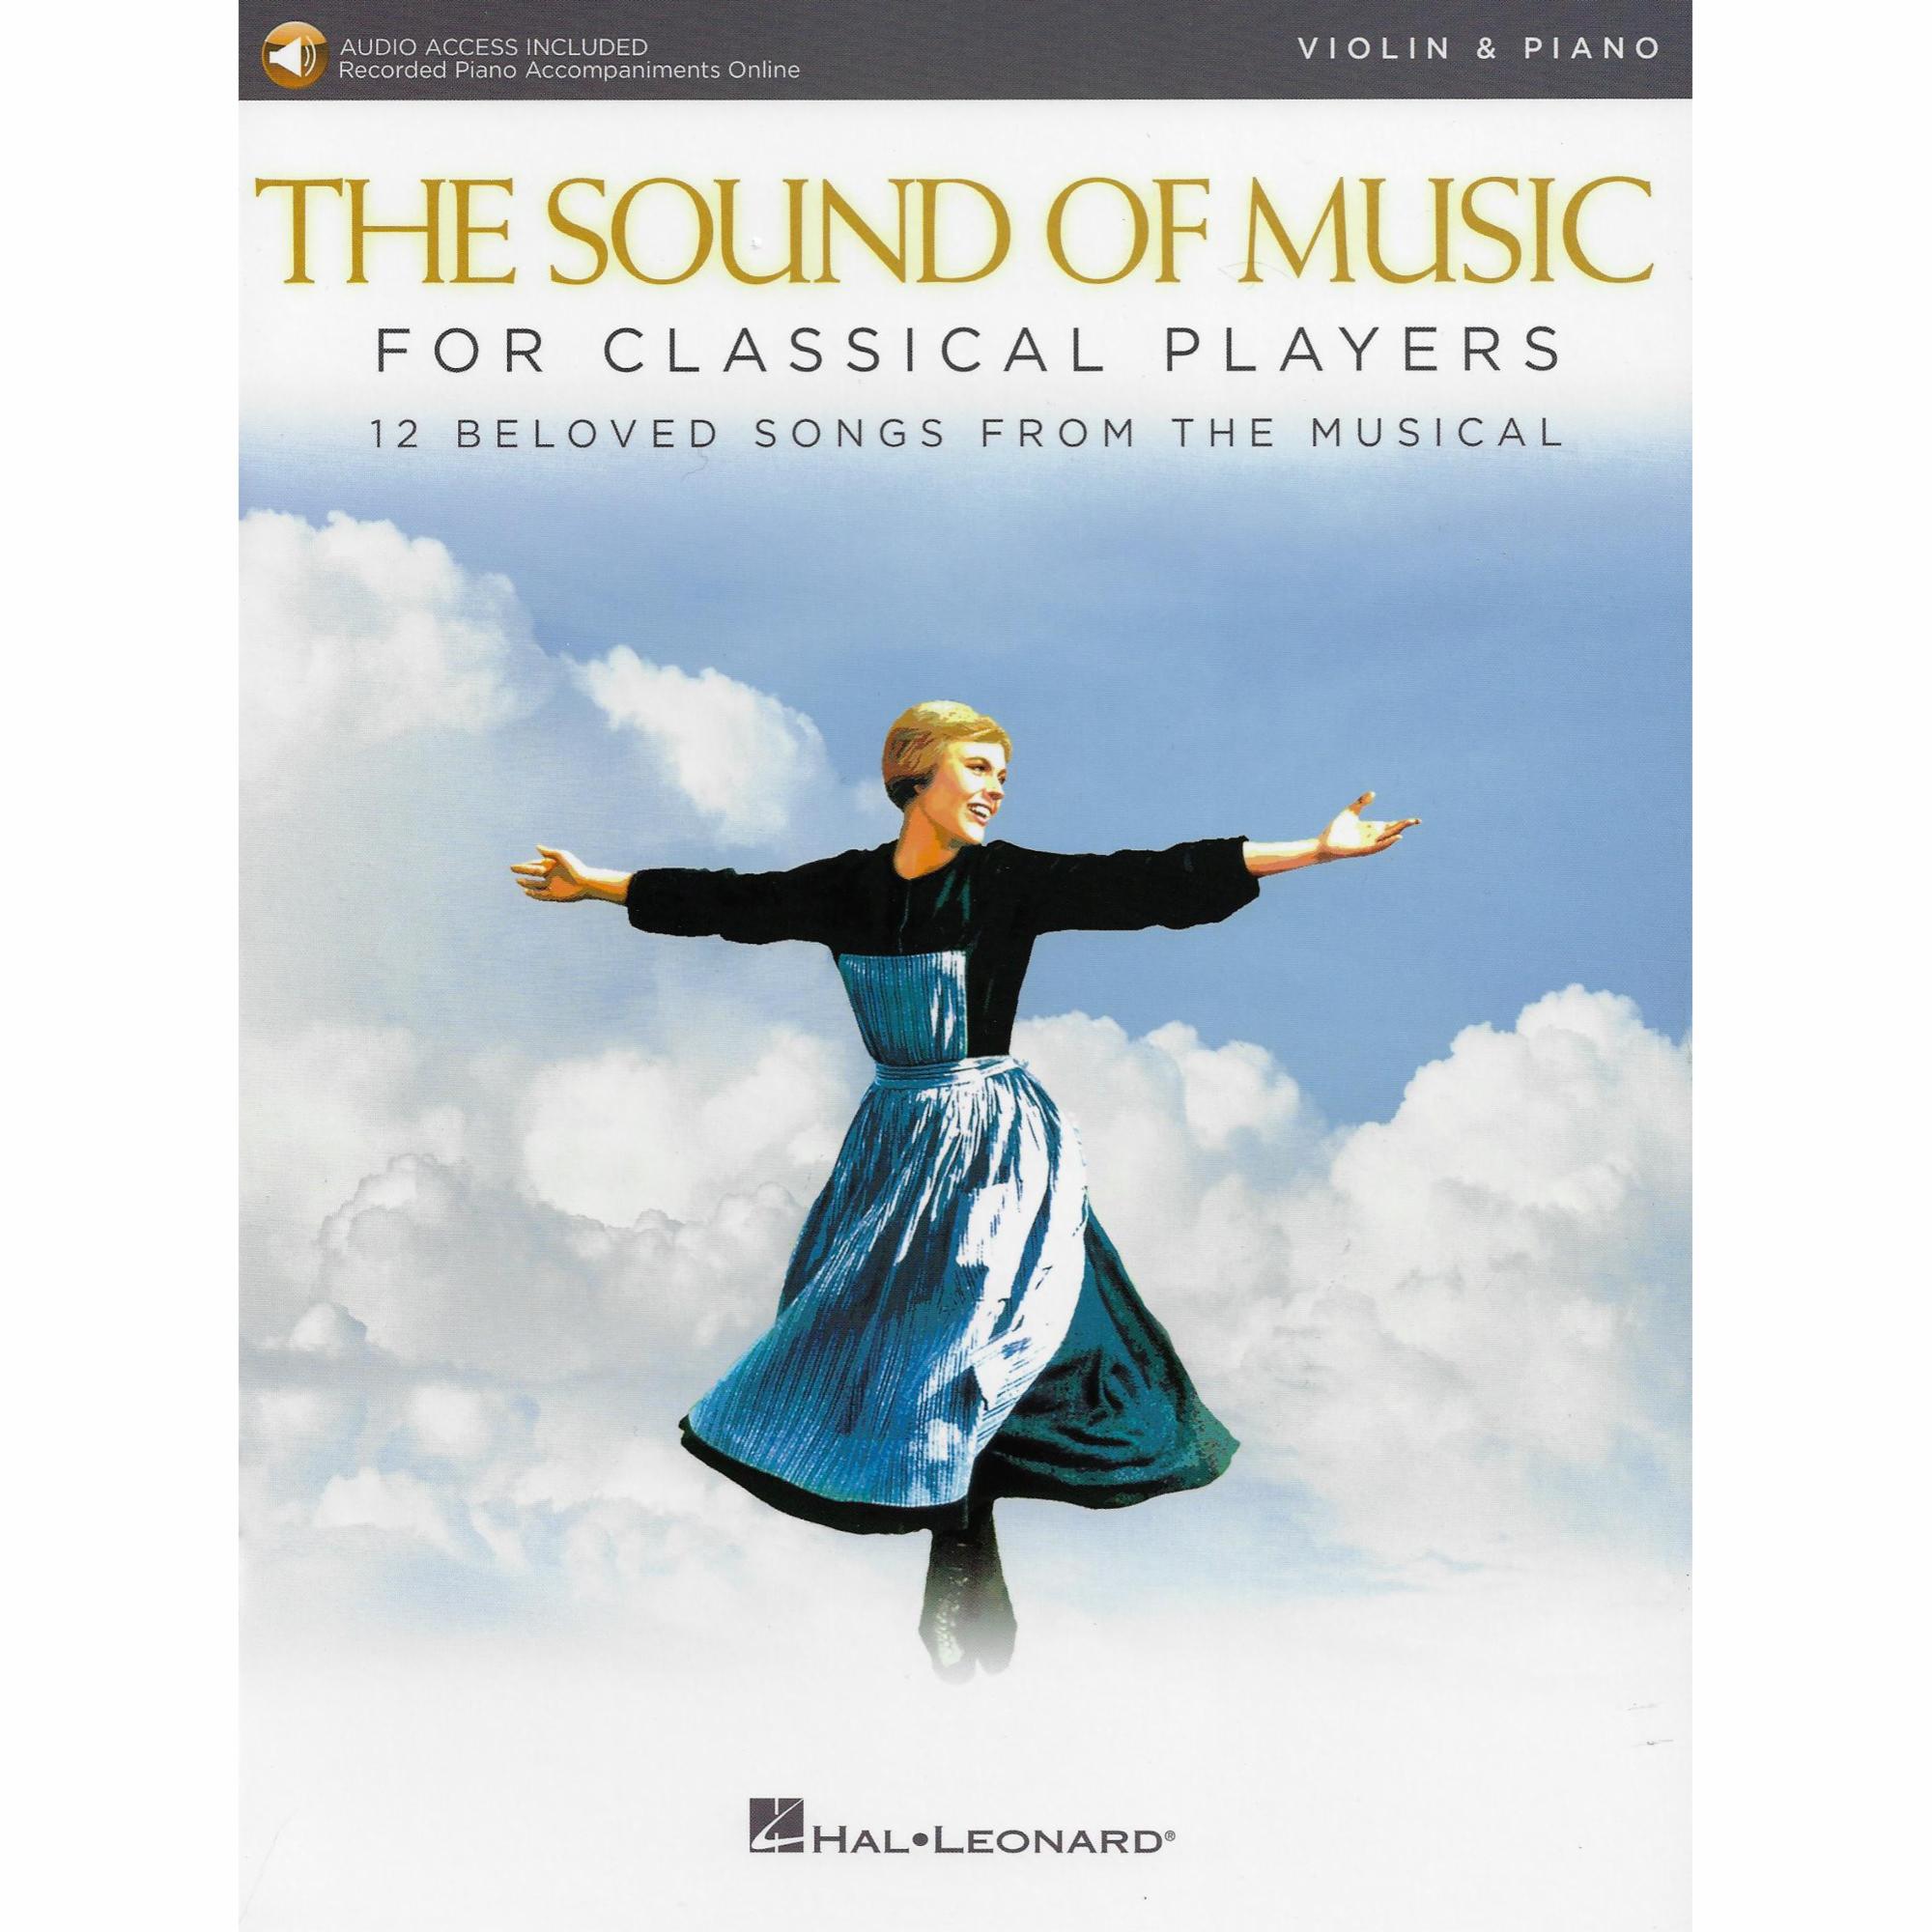 The Sound of Music for Classical Players for Violin or Cello and Piano